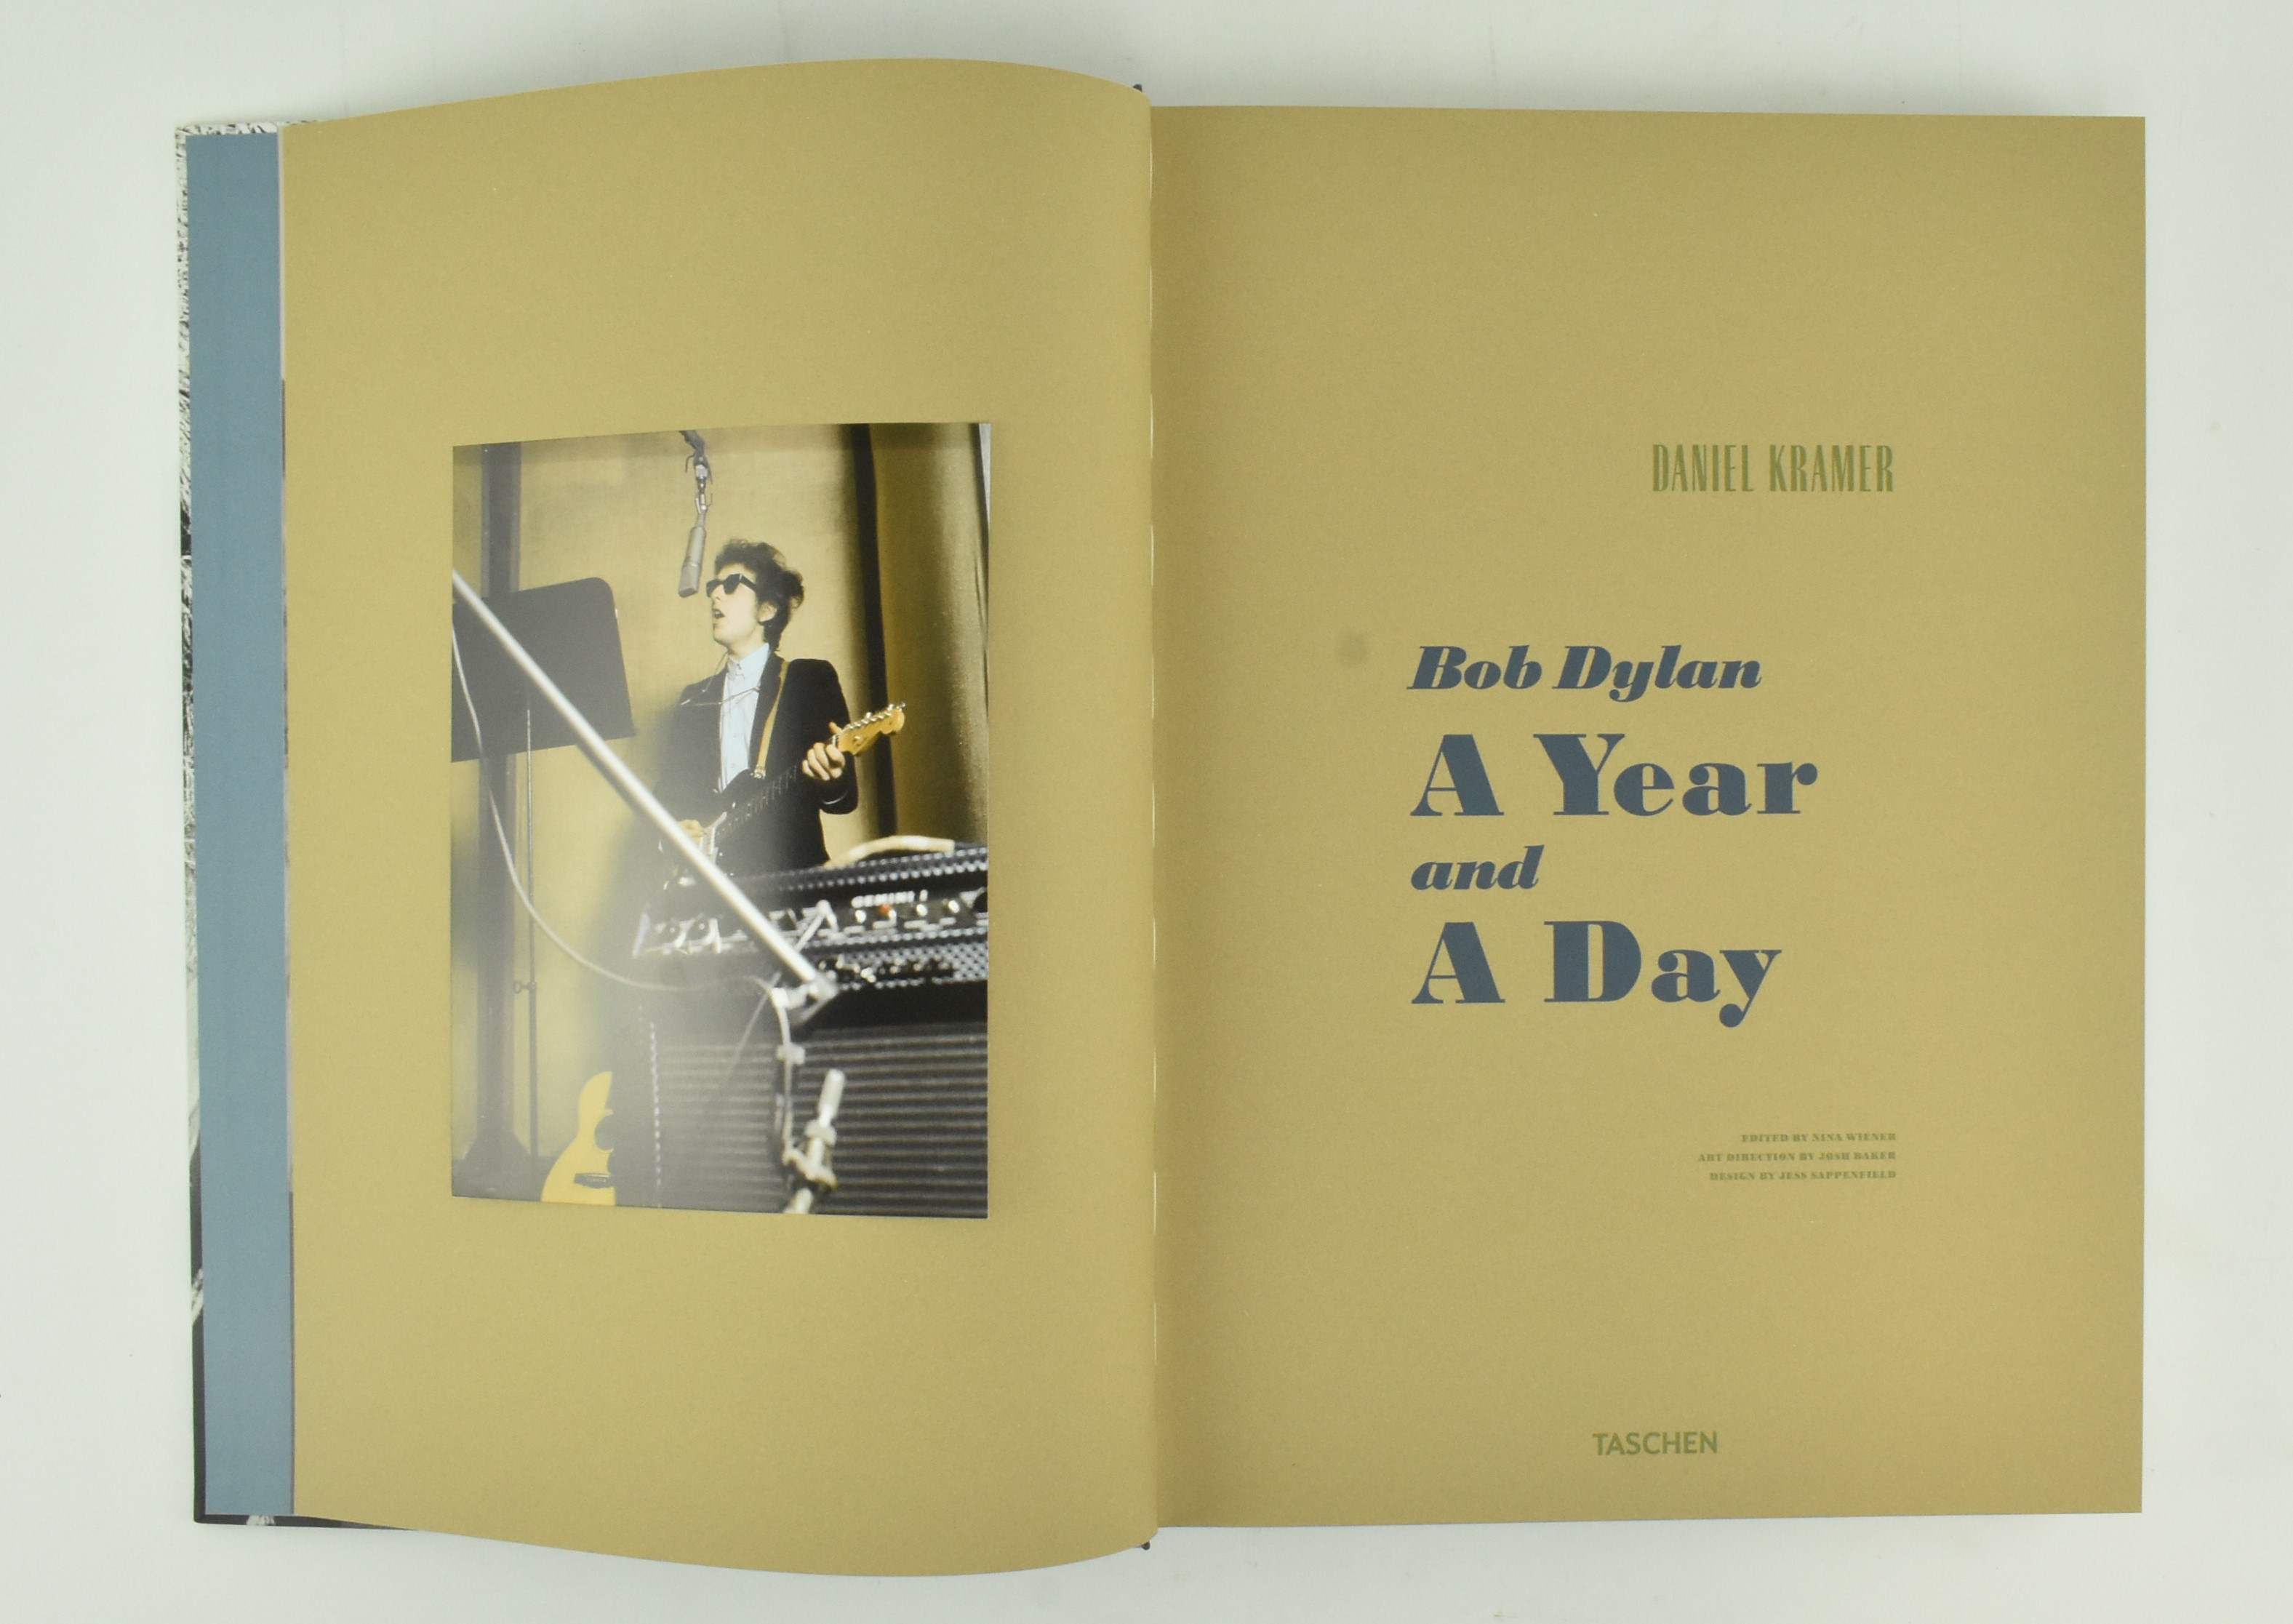 BOB DYLAN A YEAR AND A DAY. SIGNED LIMD EDITION BY DANIEL KRAMER - Image 4 of 11